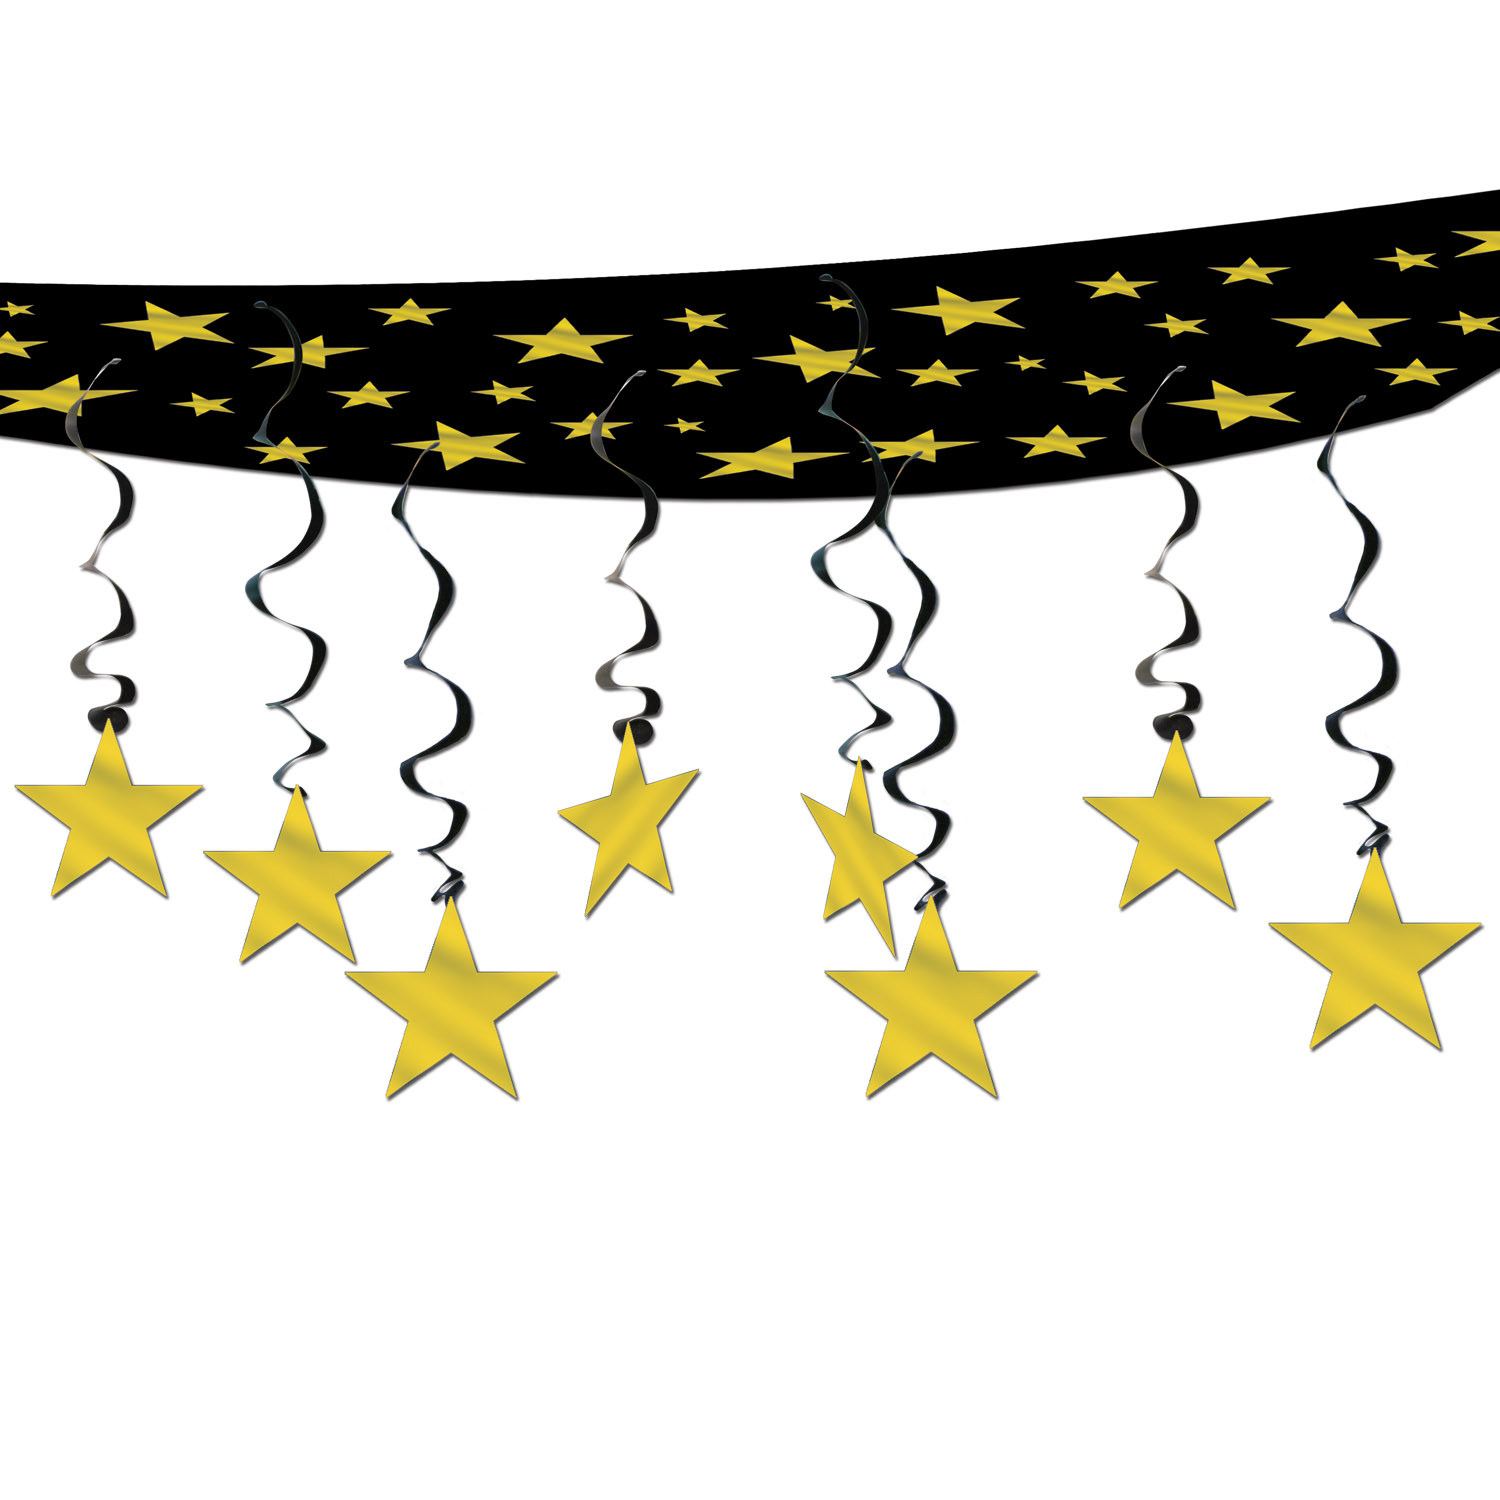 Black hanging ceiling decor with gold stars and hanging black whirls with stars on the end. 